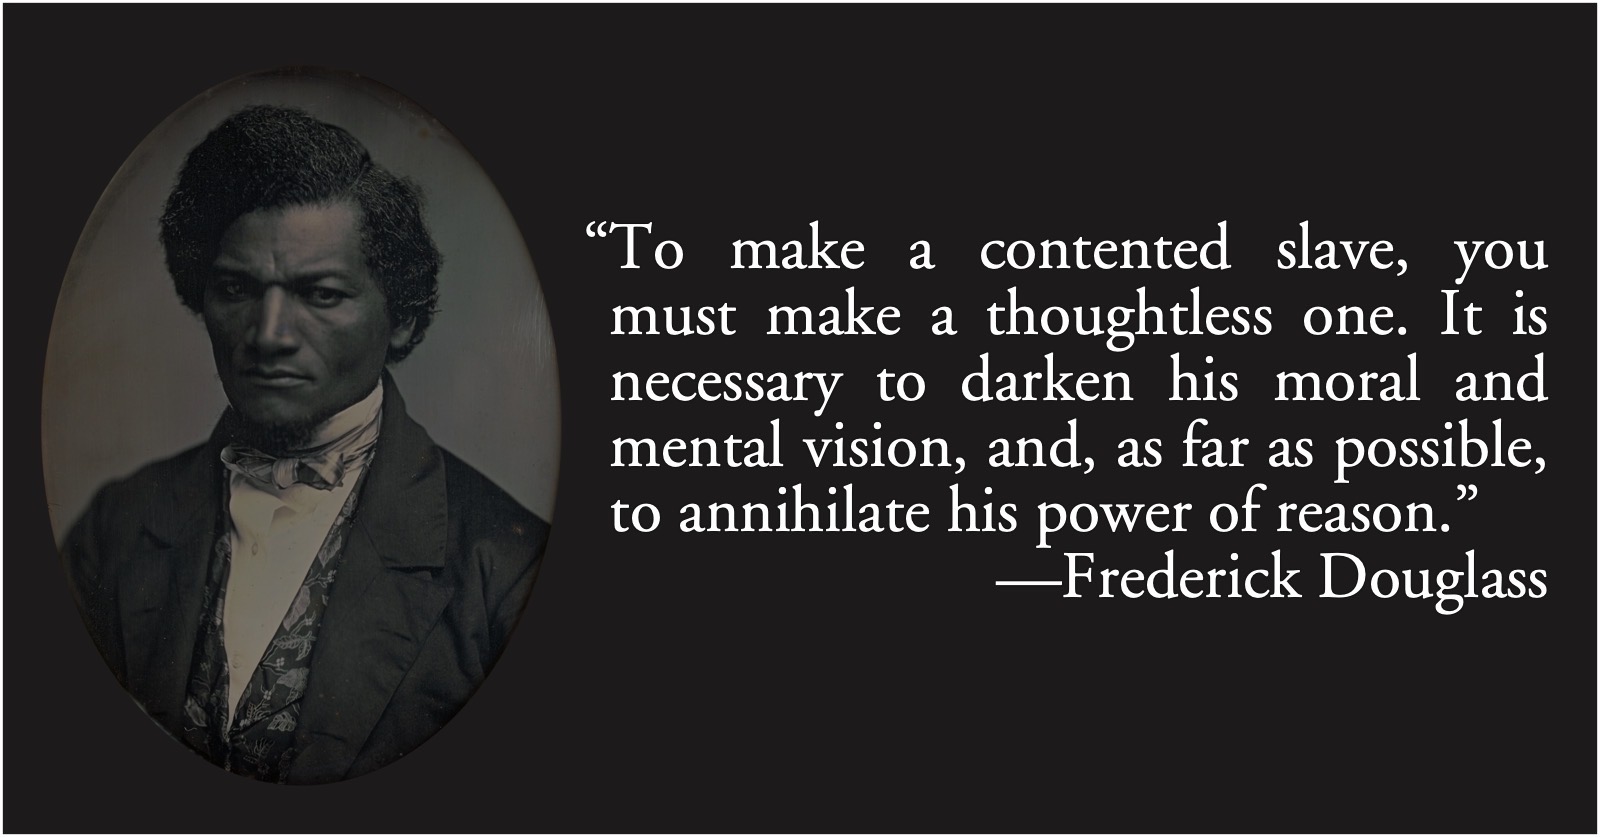 Frederick Douglass: contented slaves: Frederick Douglass: “To make a contented slave, you must make a thoughtless one. It is necessary to darken his moral and mental vision, and, as far as possible, to annihilate his power of reason.”; education; slavery; reason; Frederick Douglass